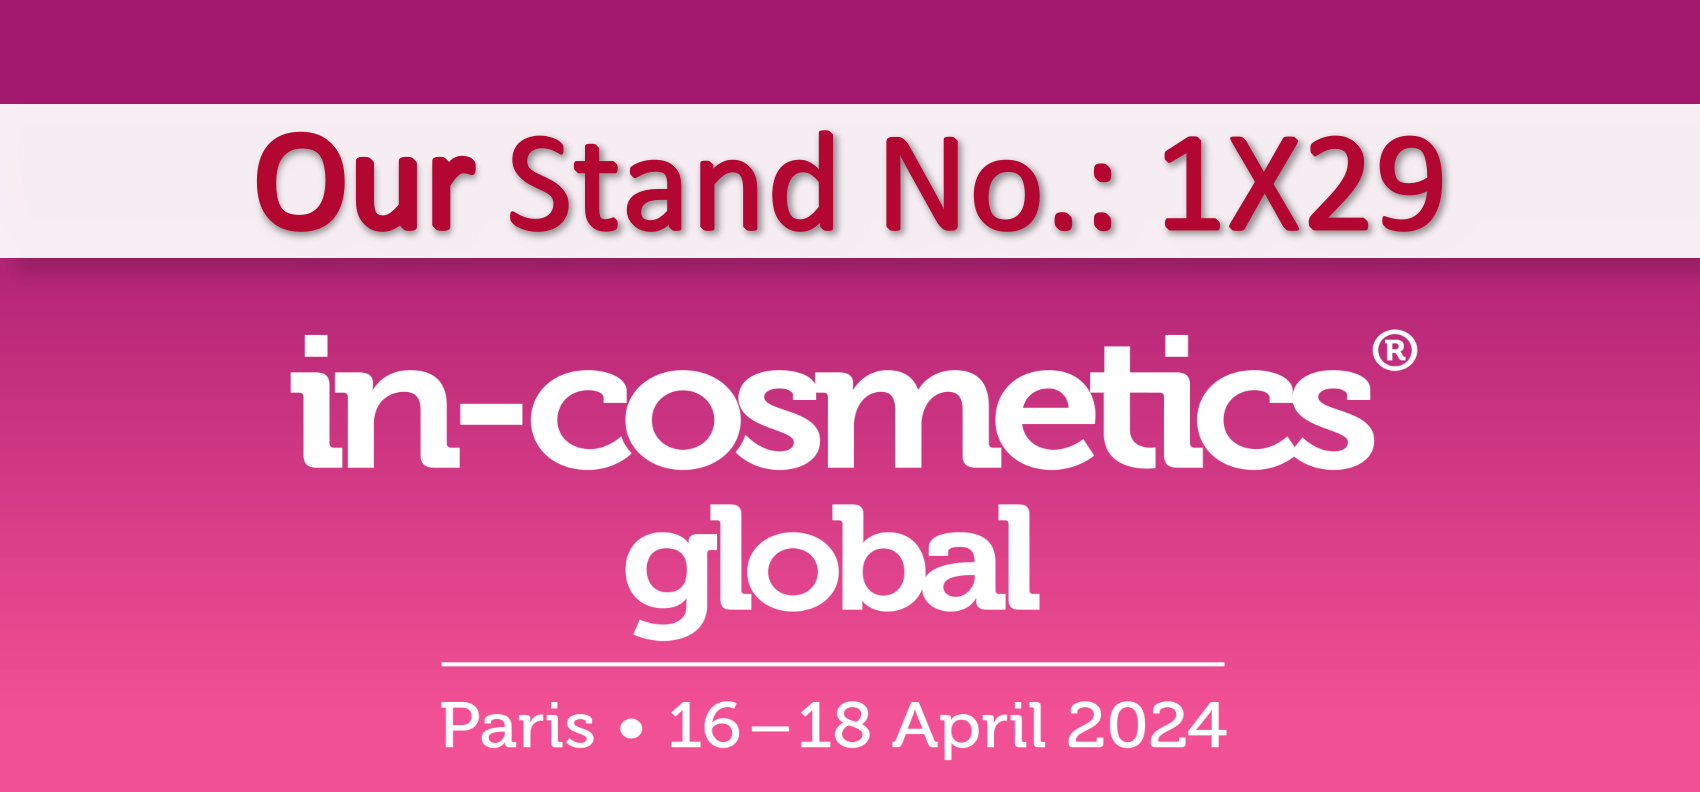 Cosroma® will exhibit at In-Cosmetics Global 2024 Stand 1X29